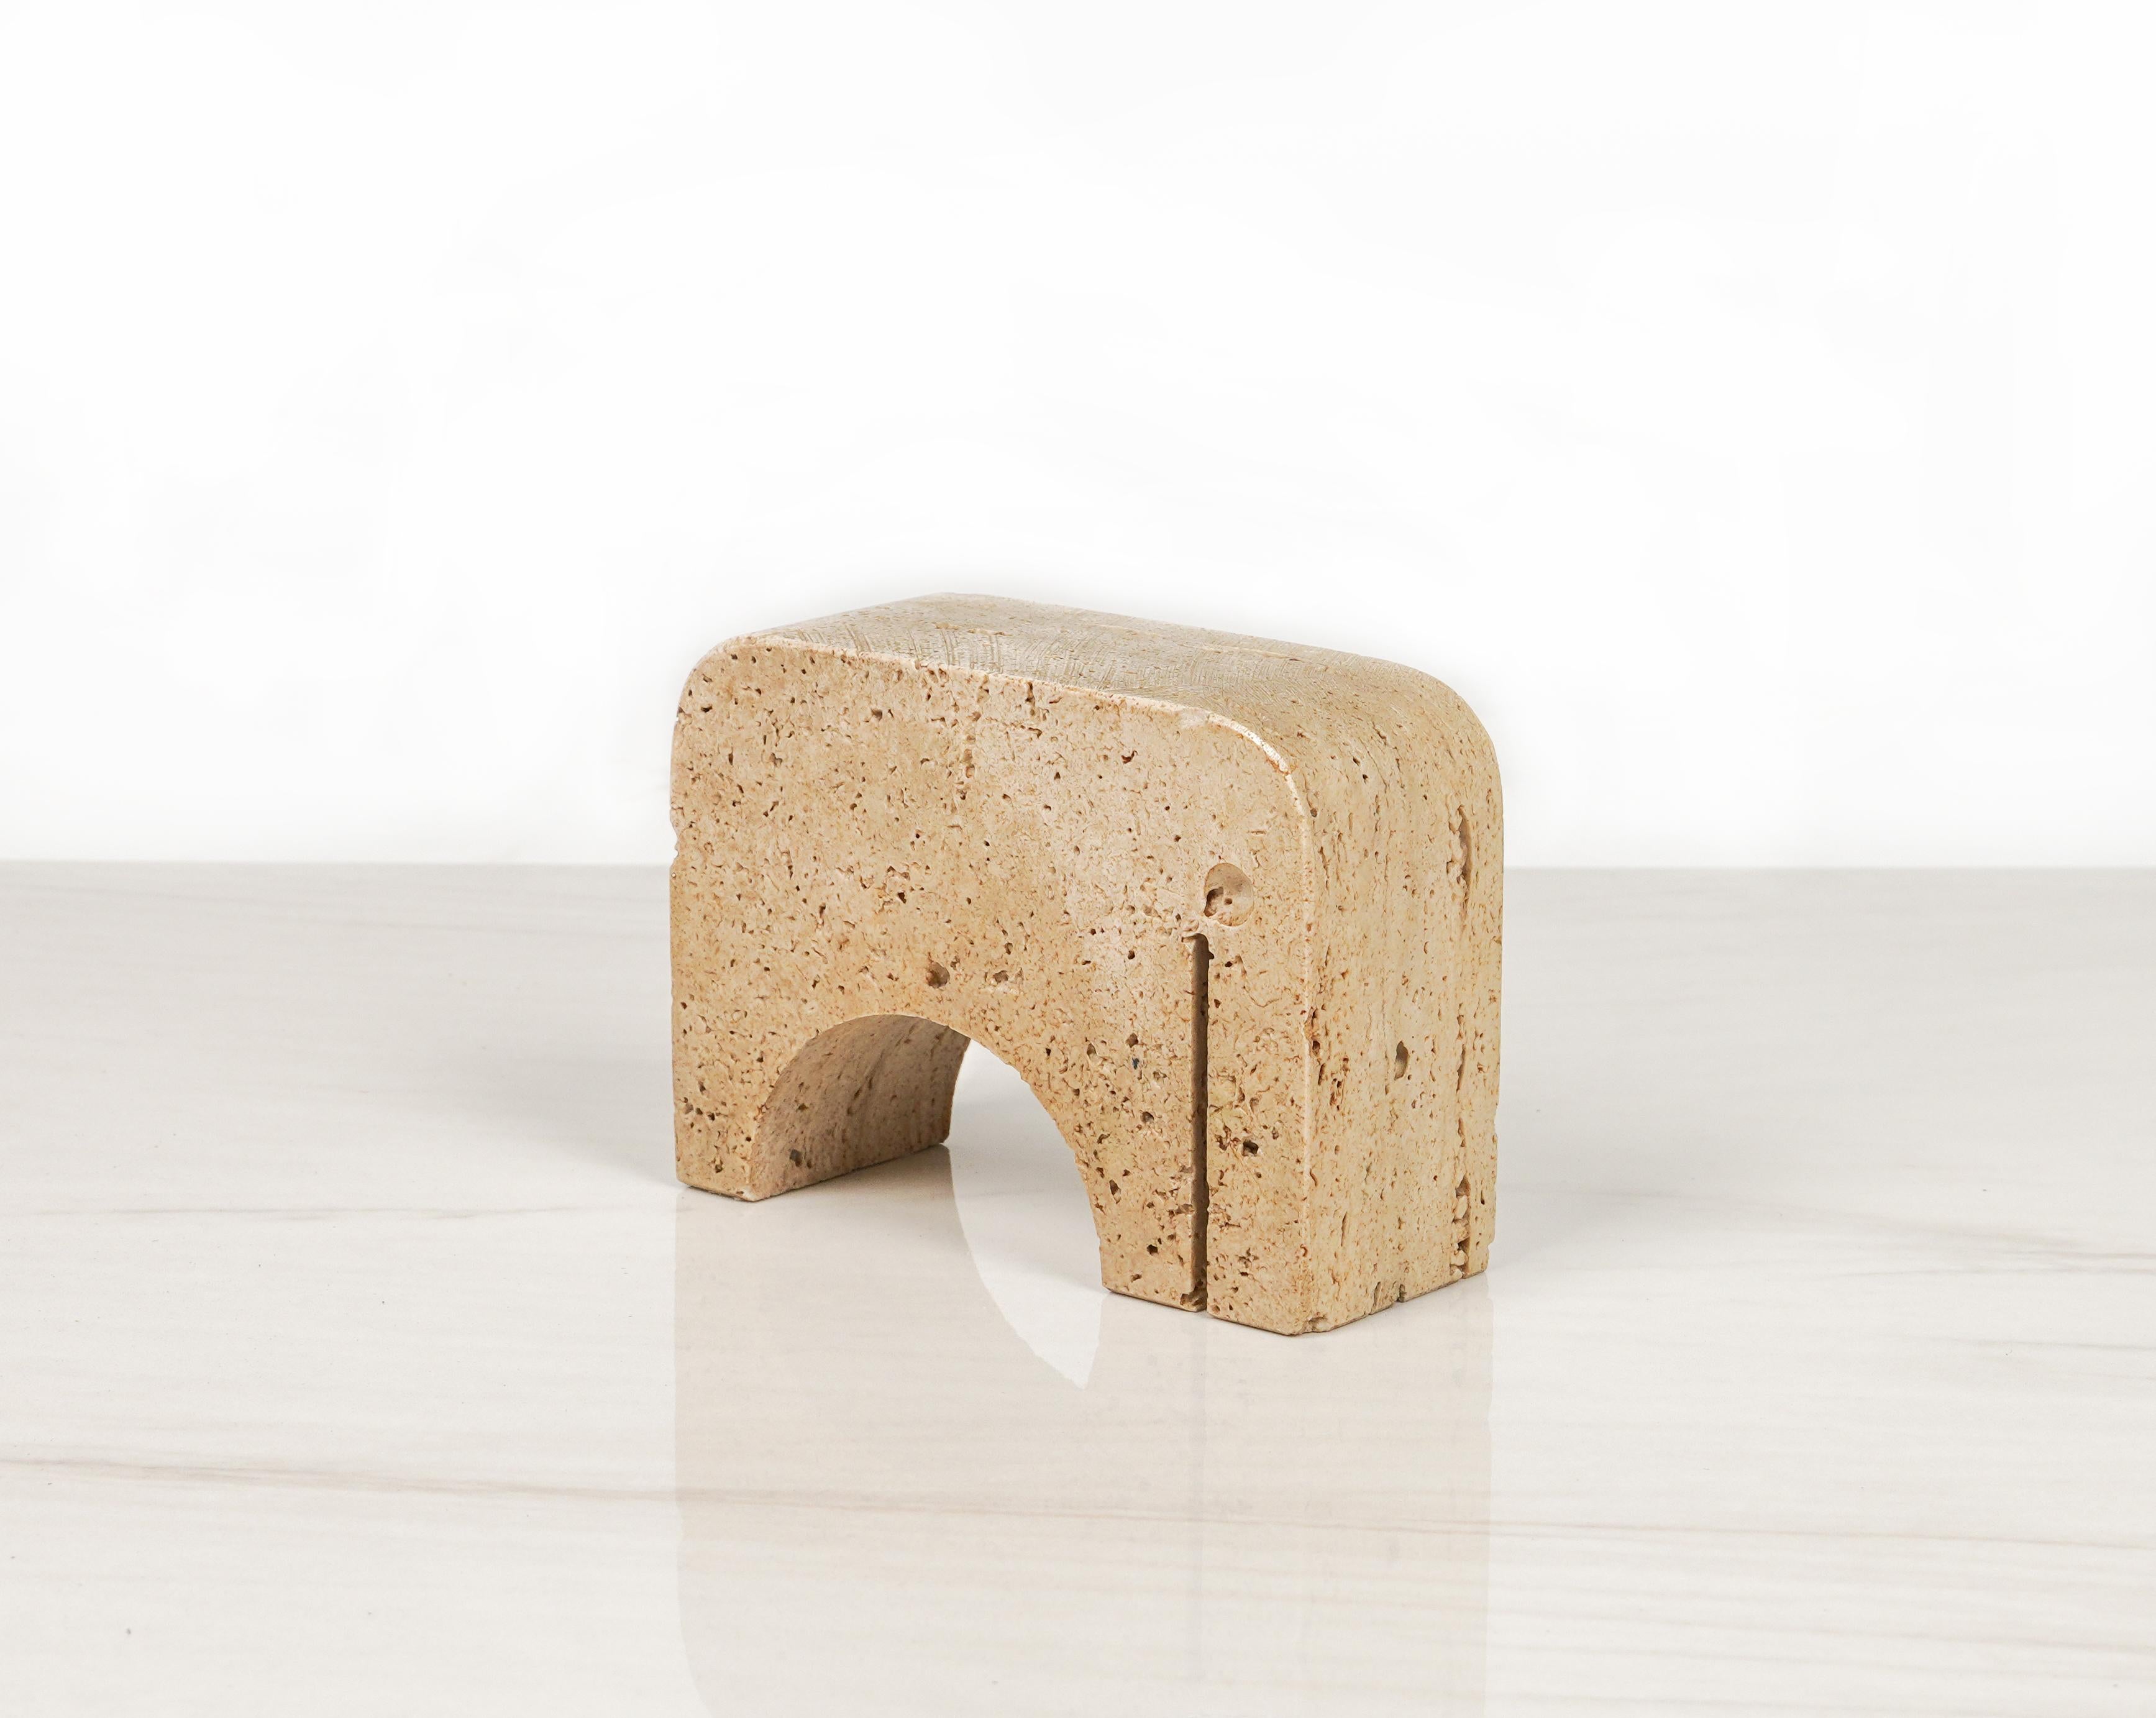 Travertine Elephant Sculpture / Bookend by Fratelli Mannelli, Italy 1970s For Sale 2